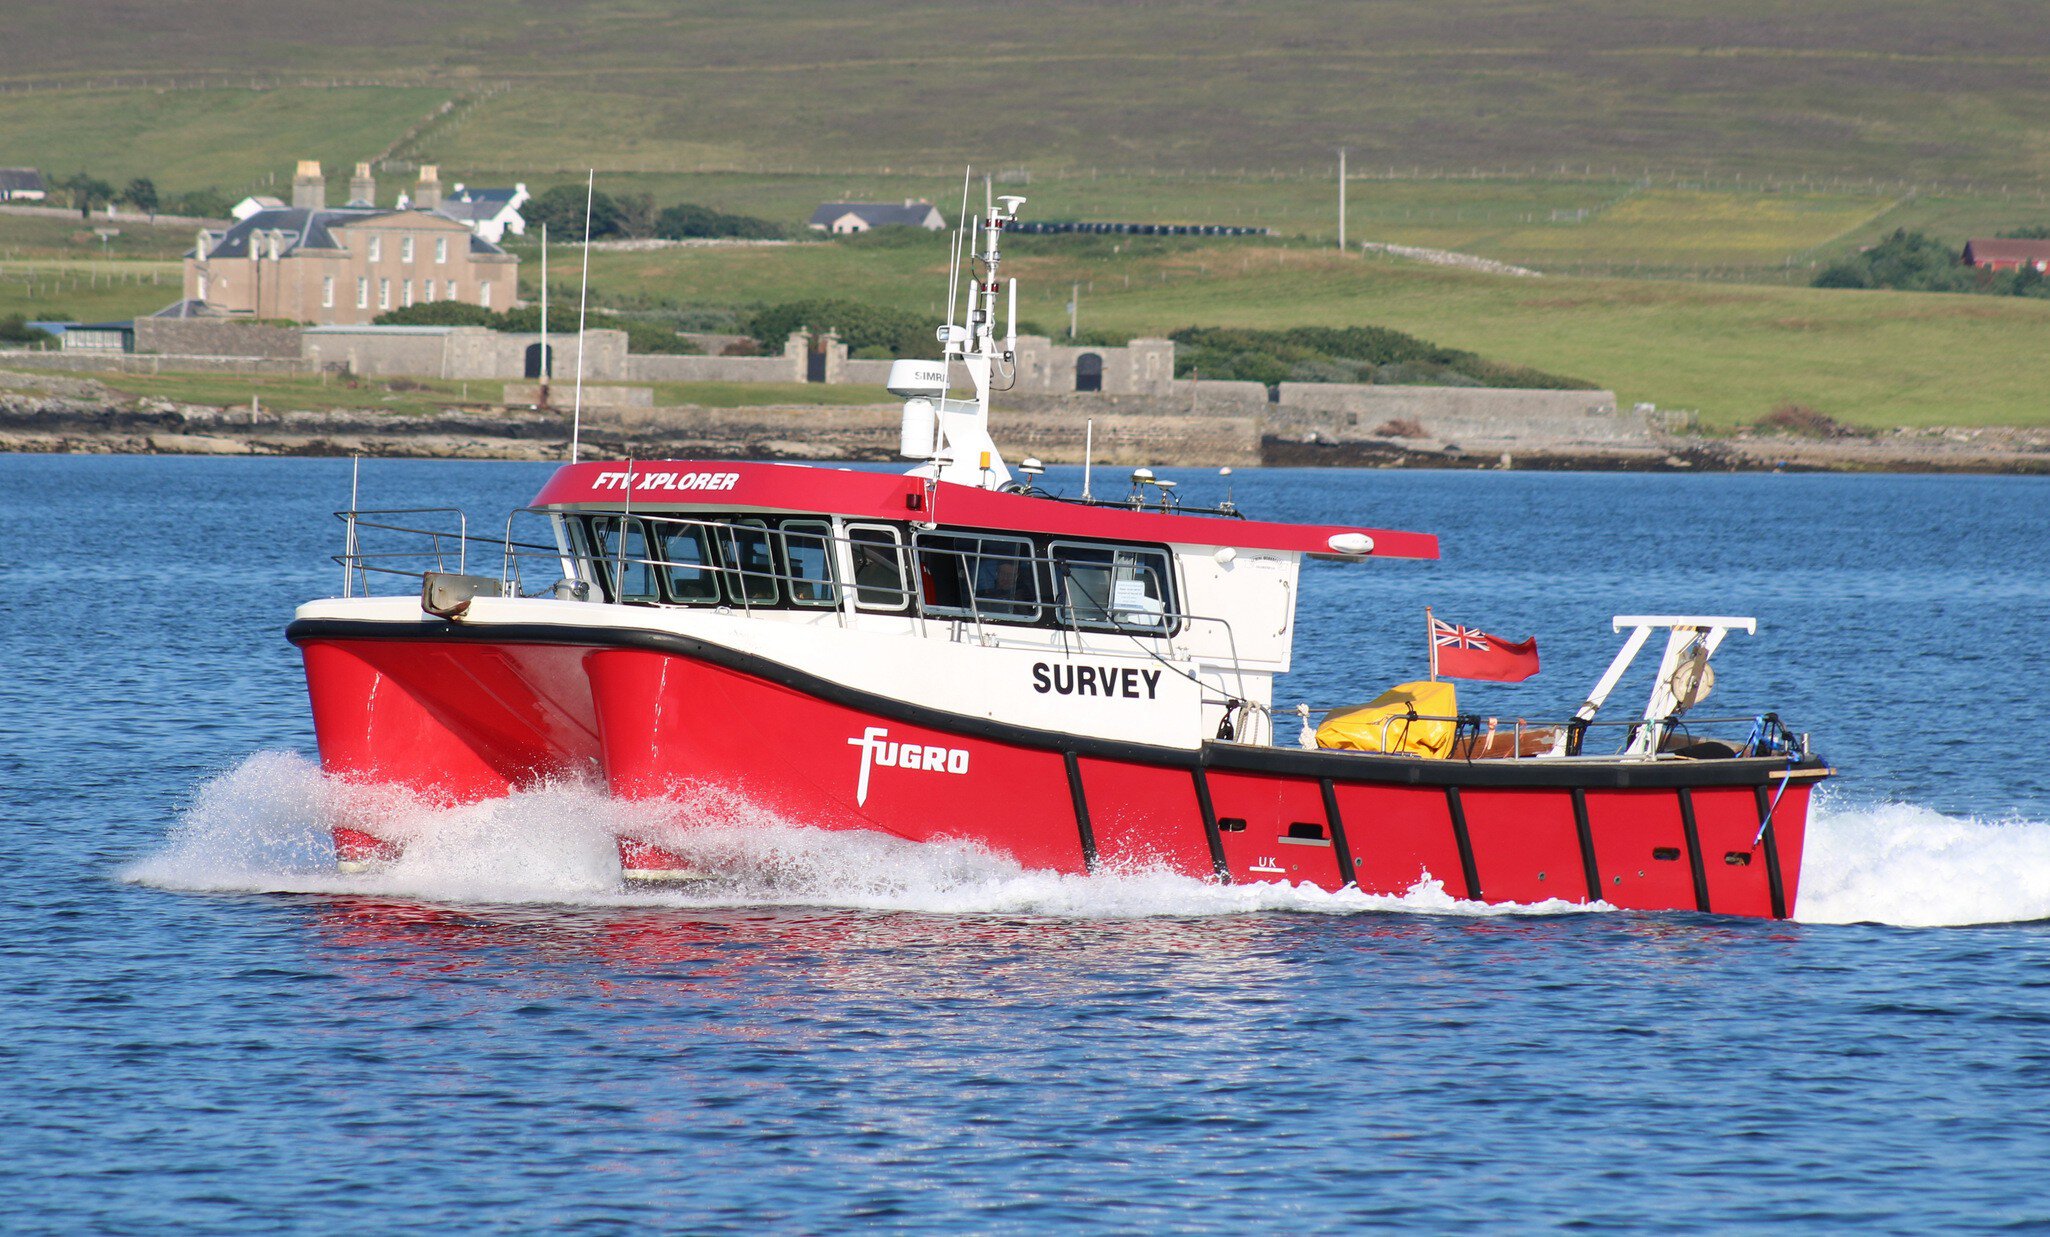 Fugro FTV Xplorer - one of the dedicated training vessels, used for hands-on training of Fugro staff in various offshore and maritime disciplines.